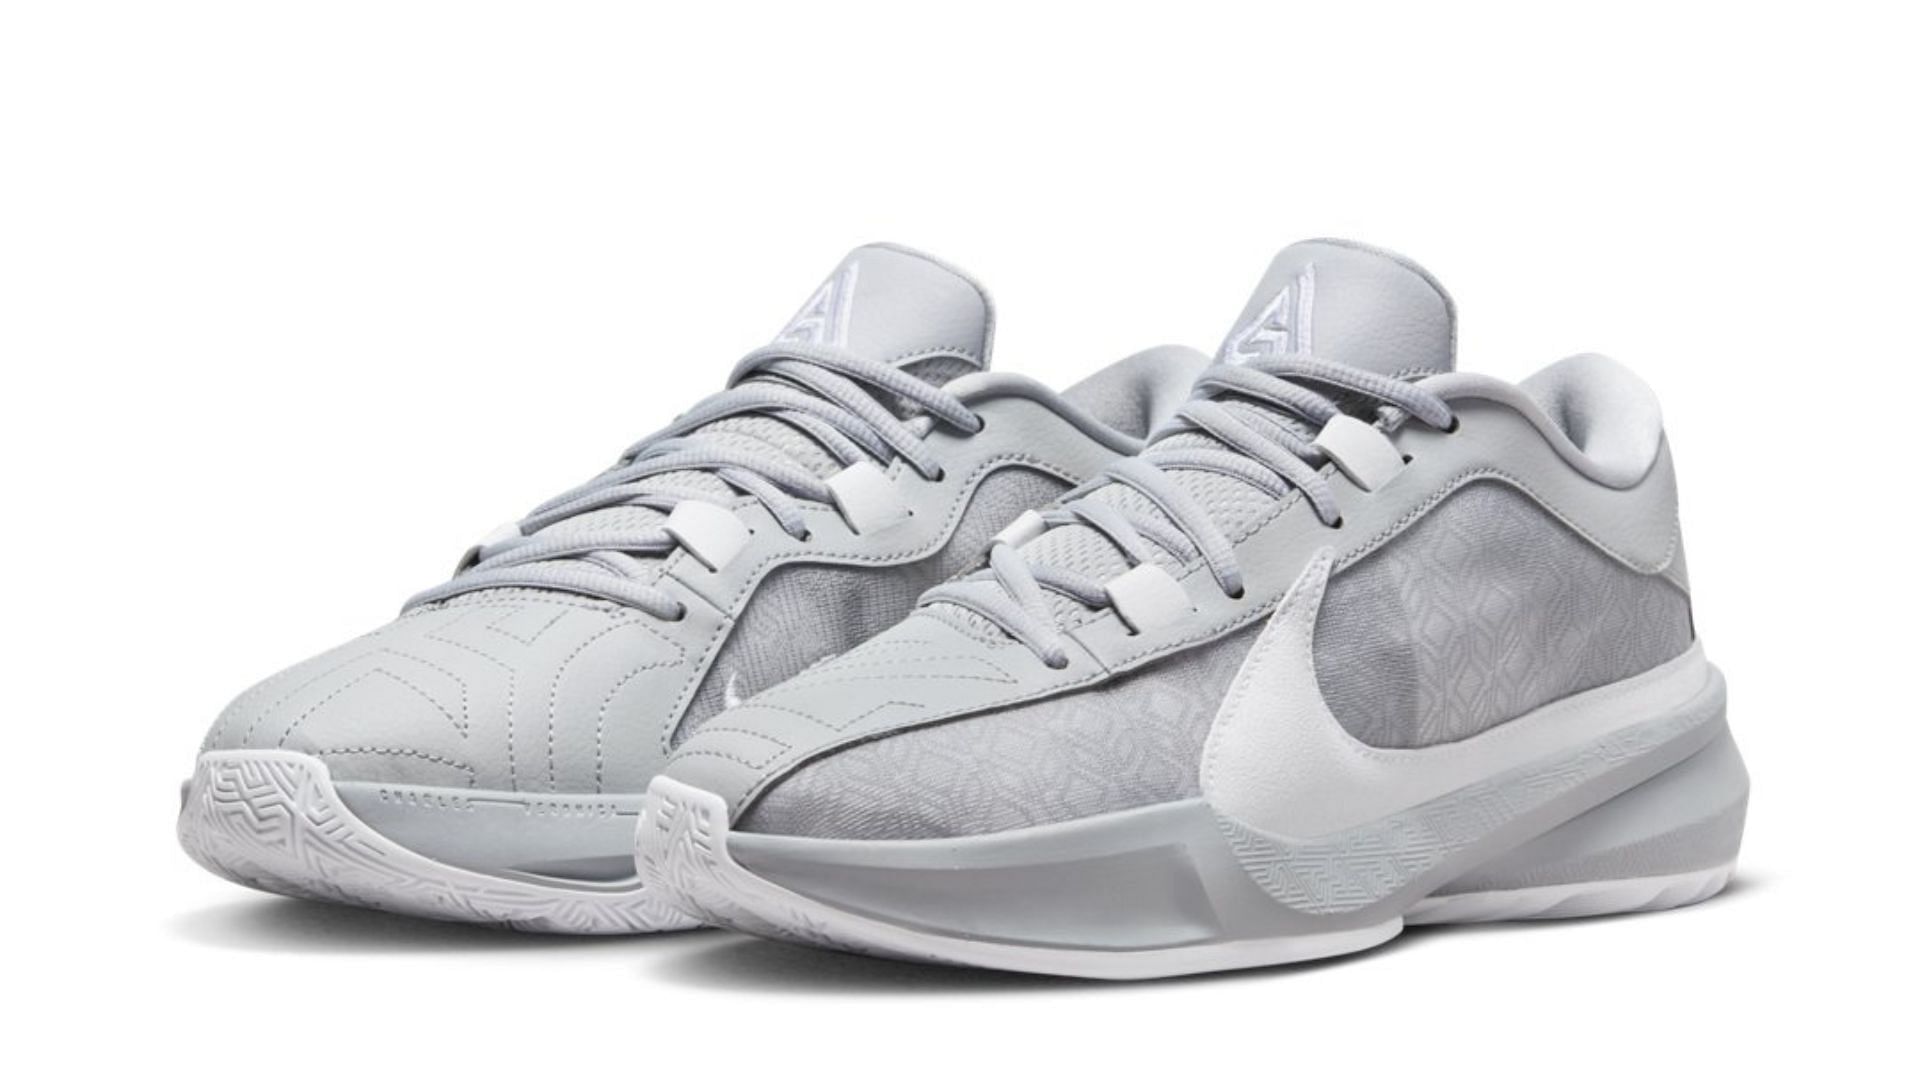 zonne oplichterij Uitwisseling Giannis Antetokounmpo: Nike Zoom Freak 5 “Wolf Grey” shoes: Where to get,  price, and more details explored